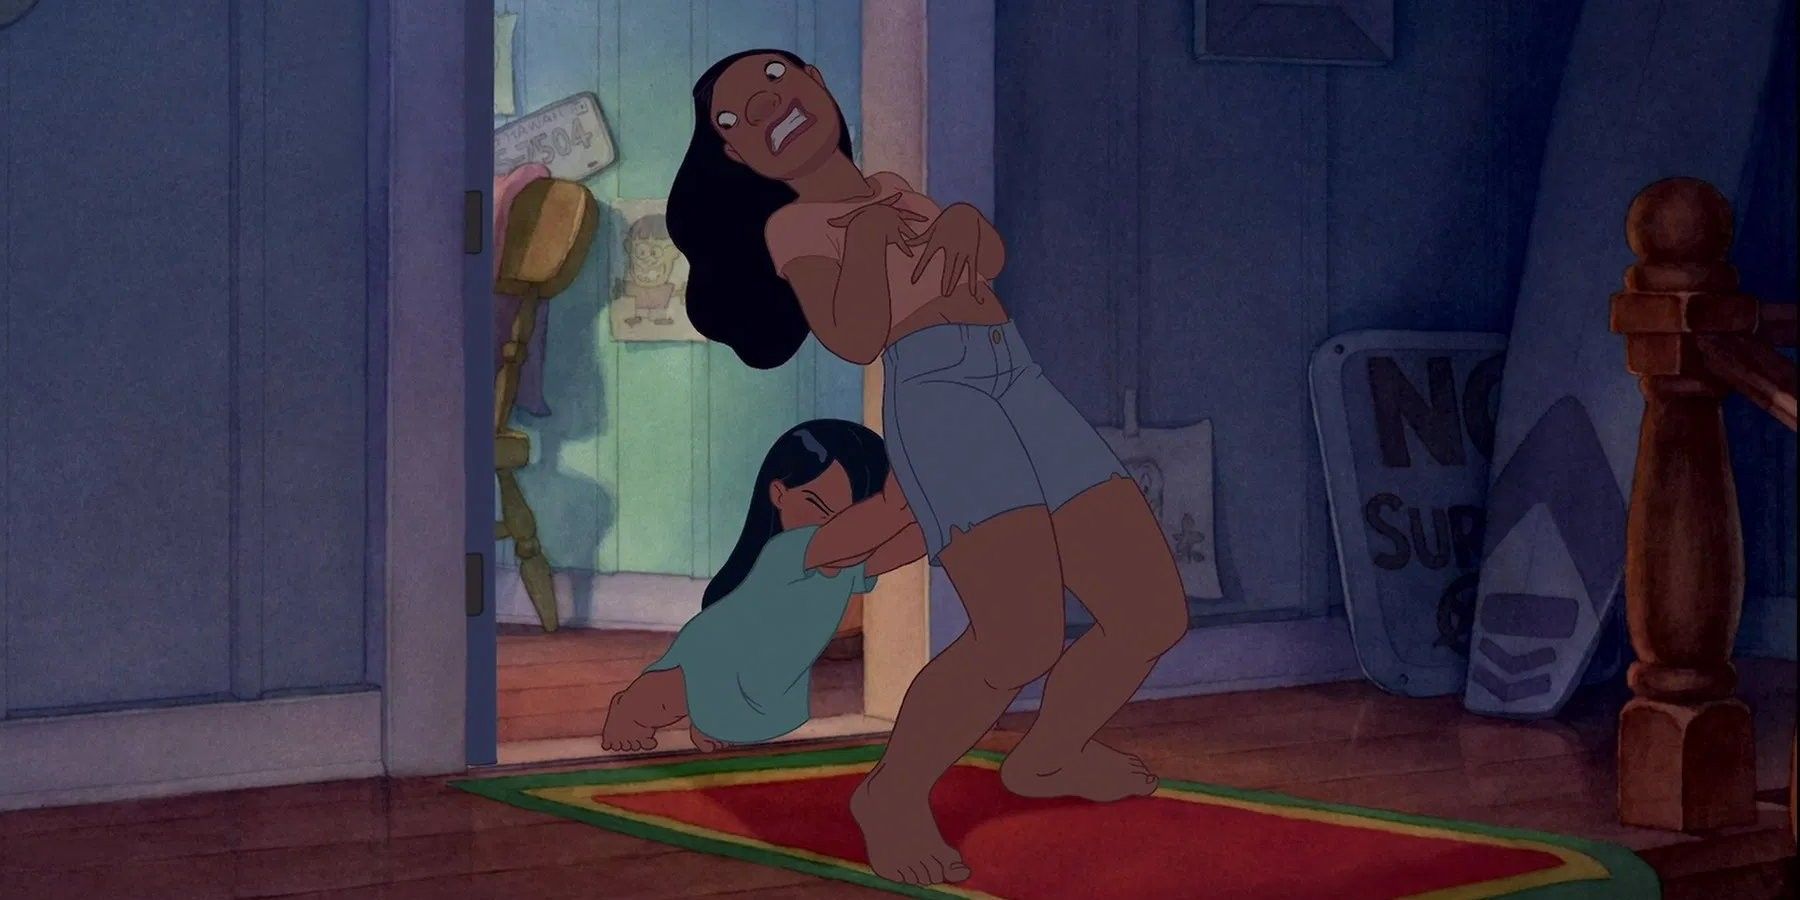 Lilo pushing Nani out of her room in Lilo and Stitch